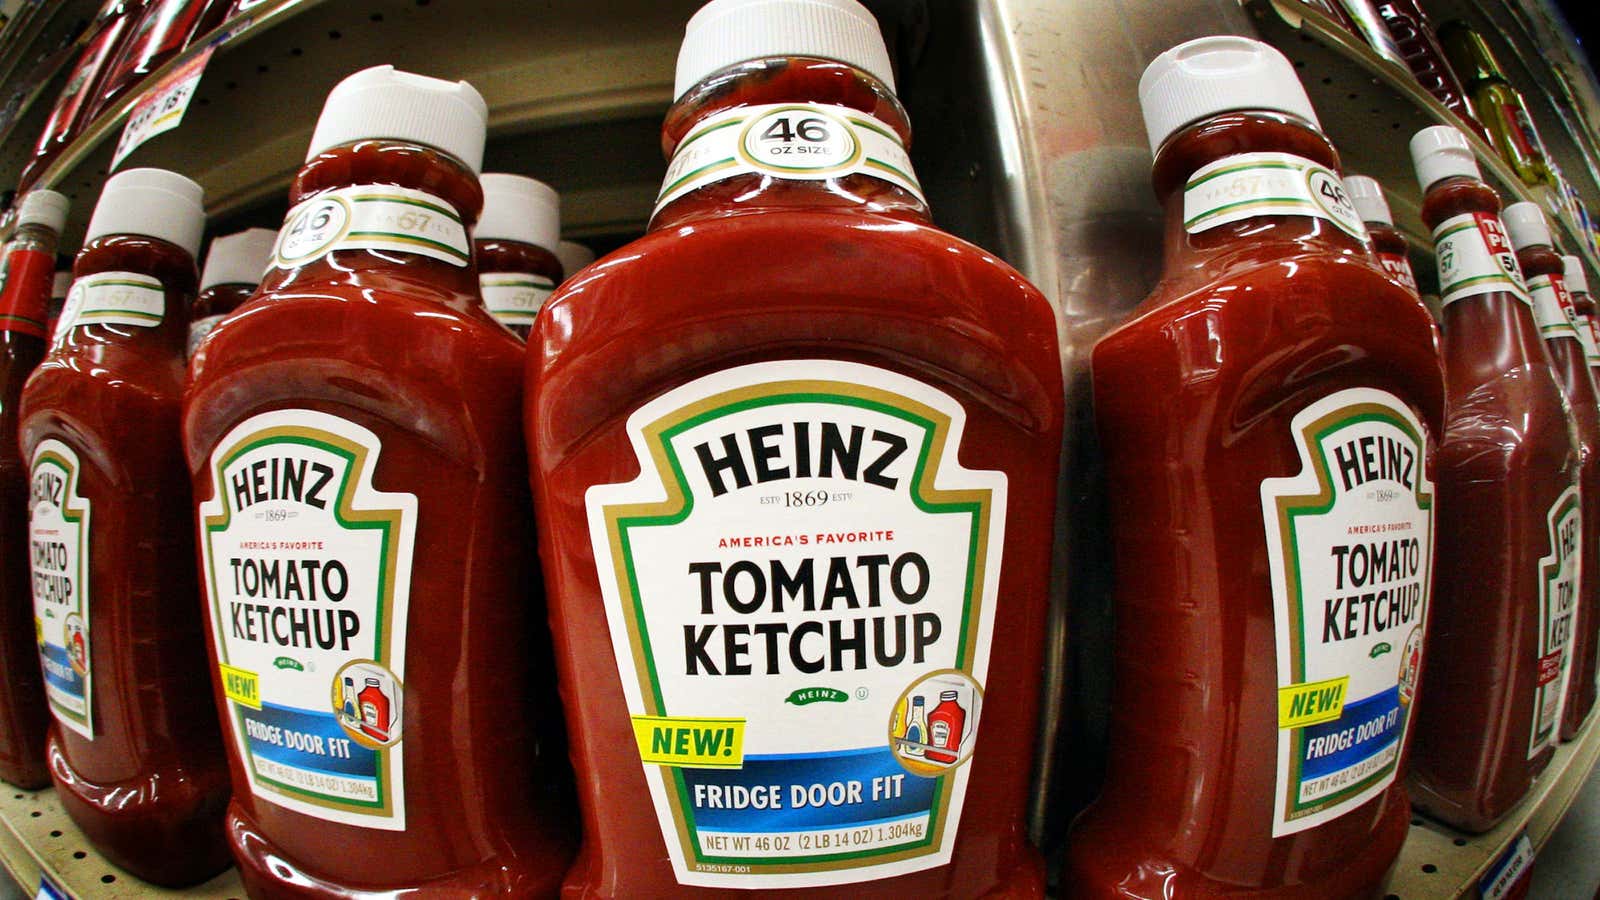 Heinz is big and getting bigger, especially outside the US.